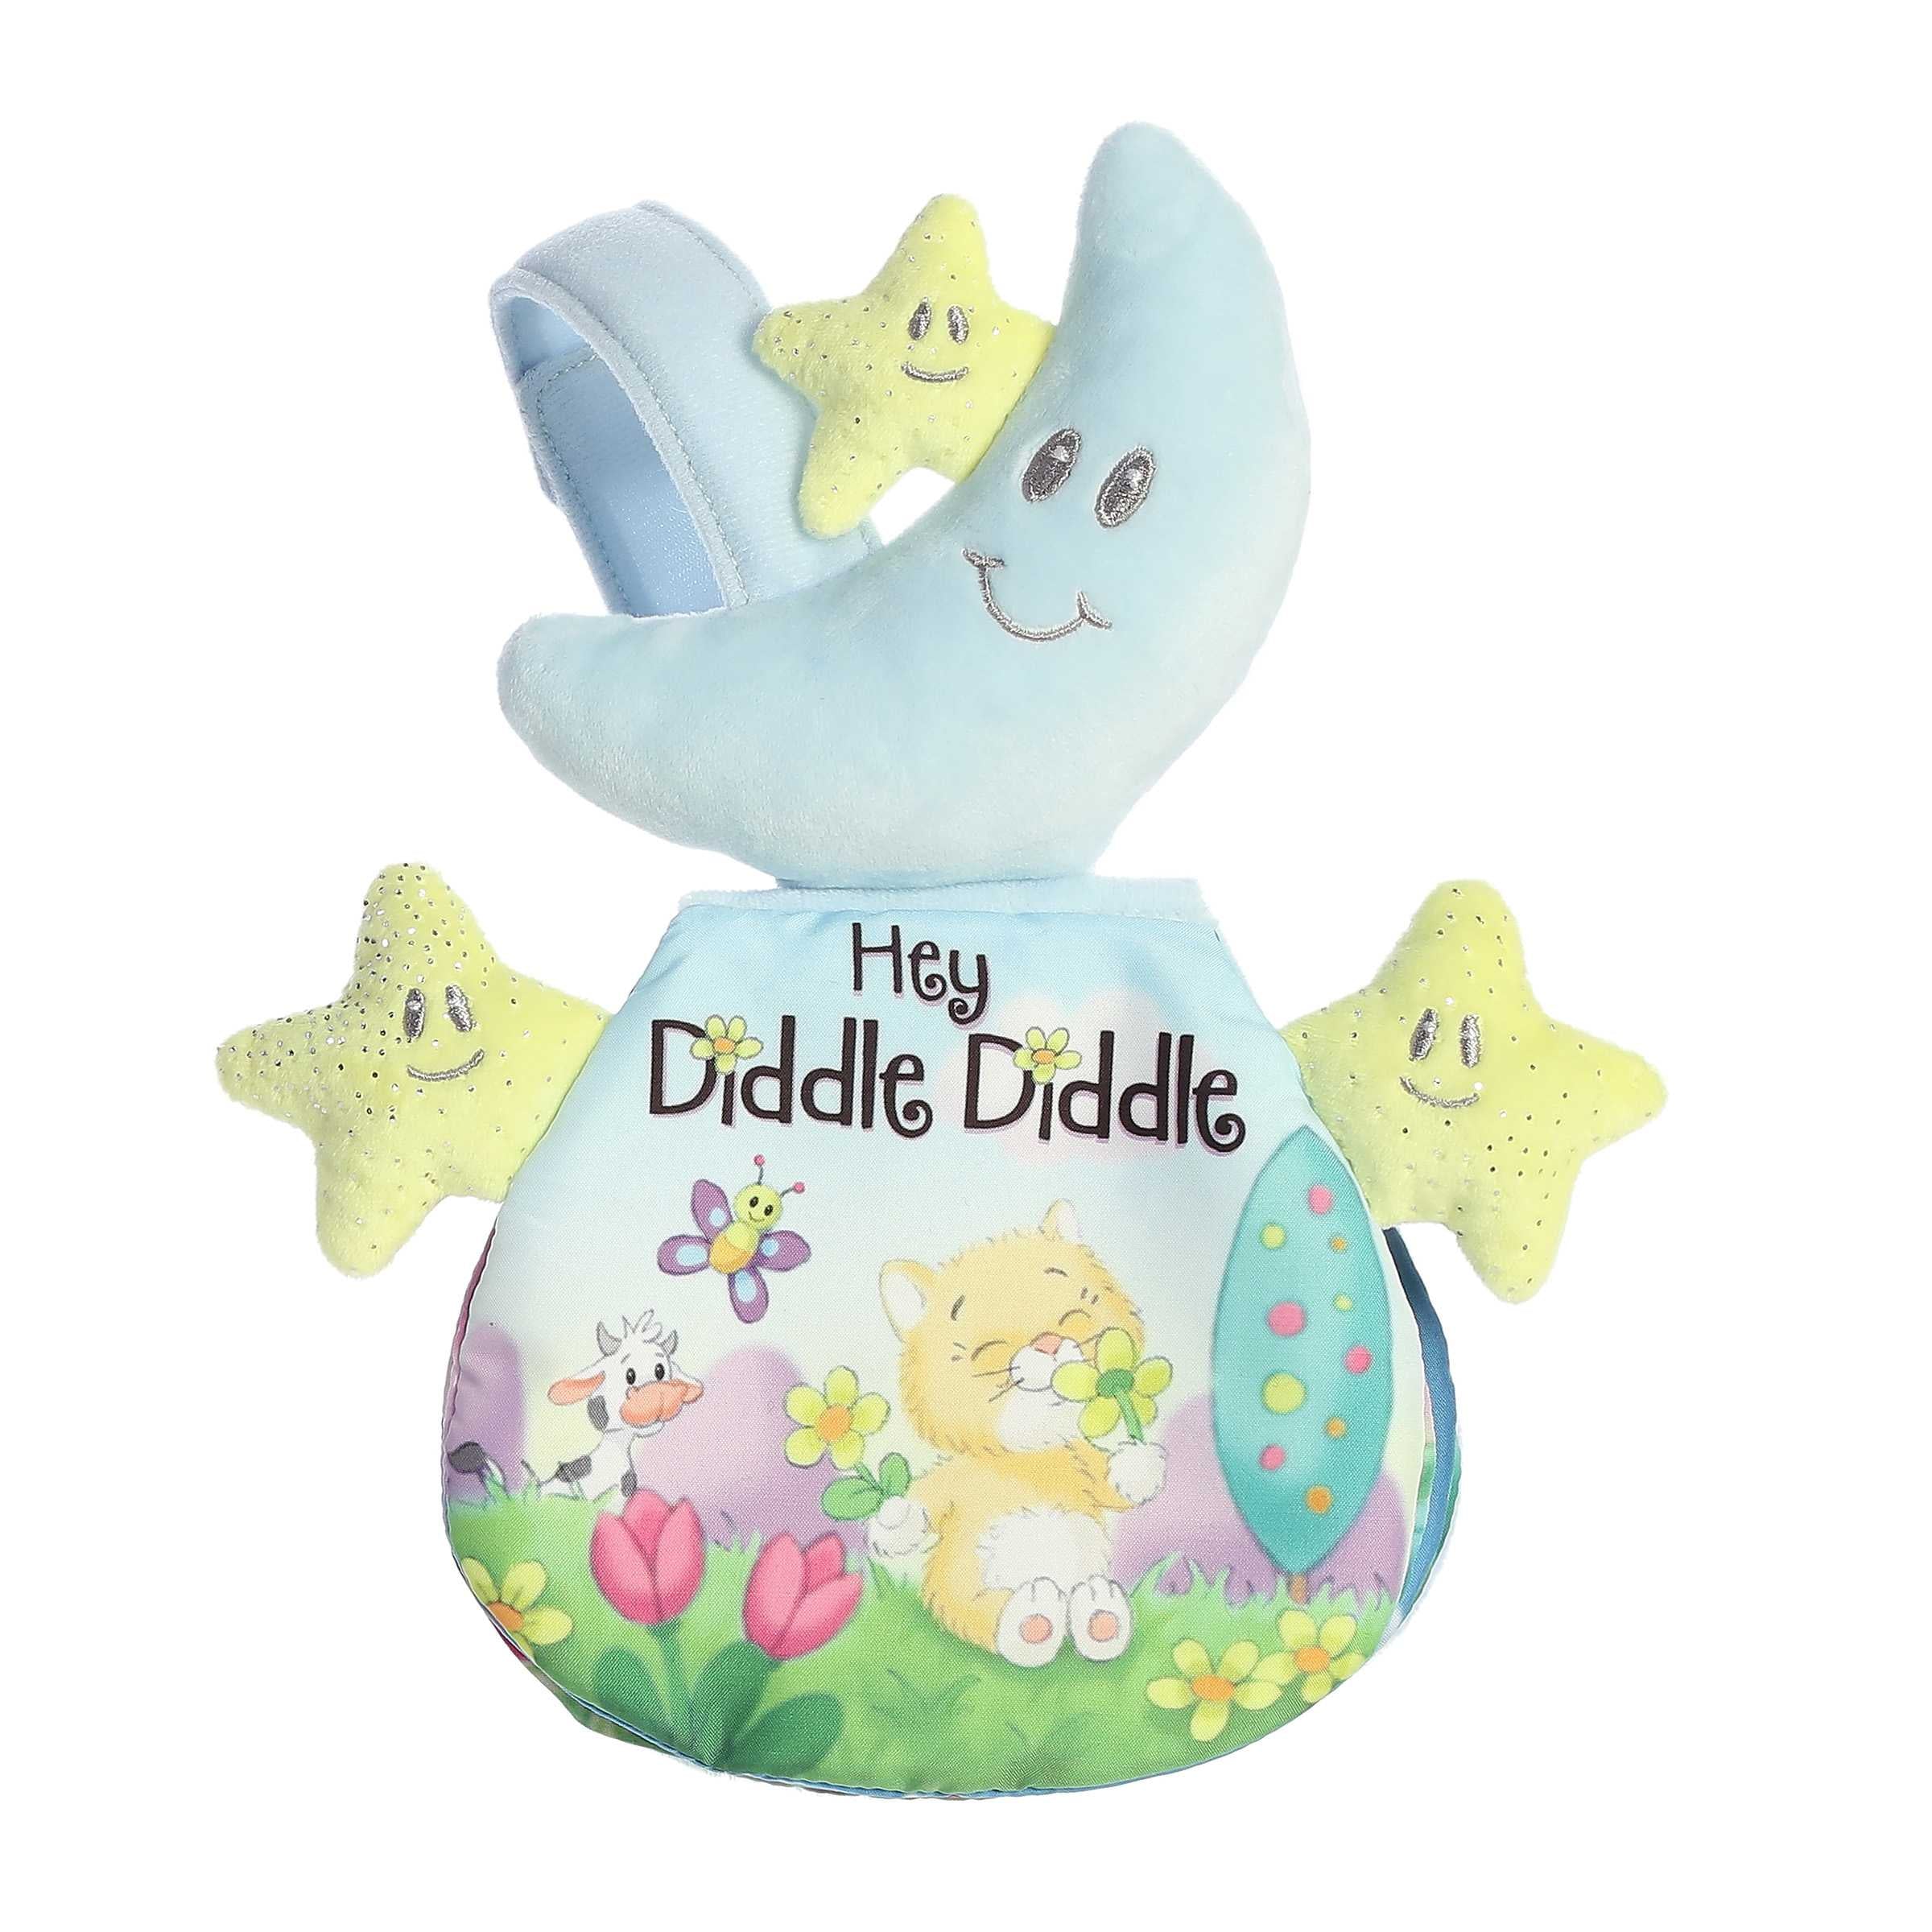 Adorable Hey Diddle Diddle book with crinkly pages and pictures, attached hook, and blue moon and yellow stars plush toy